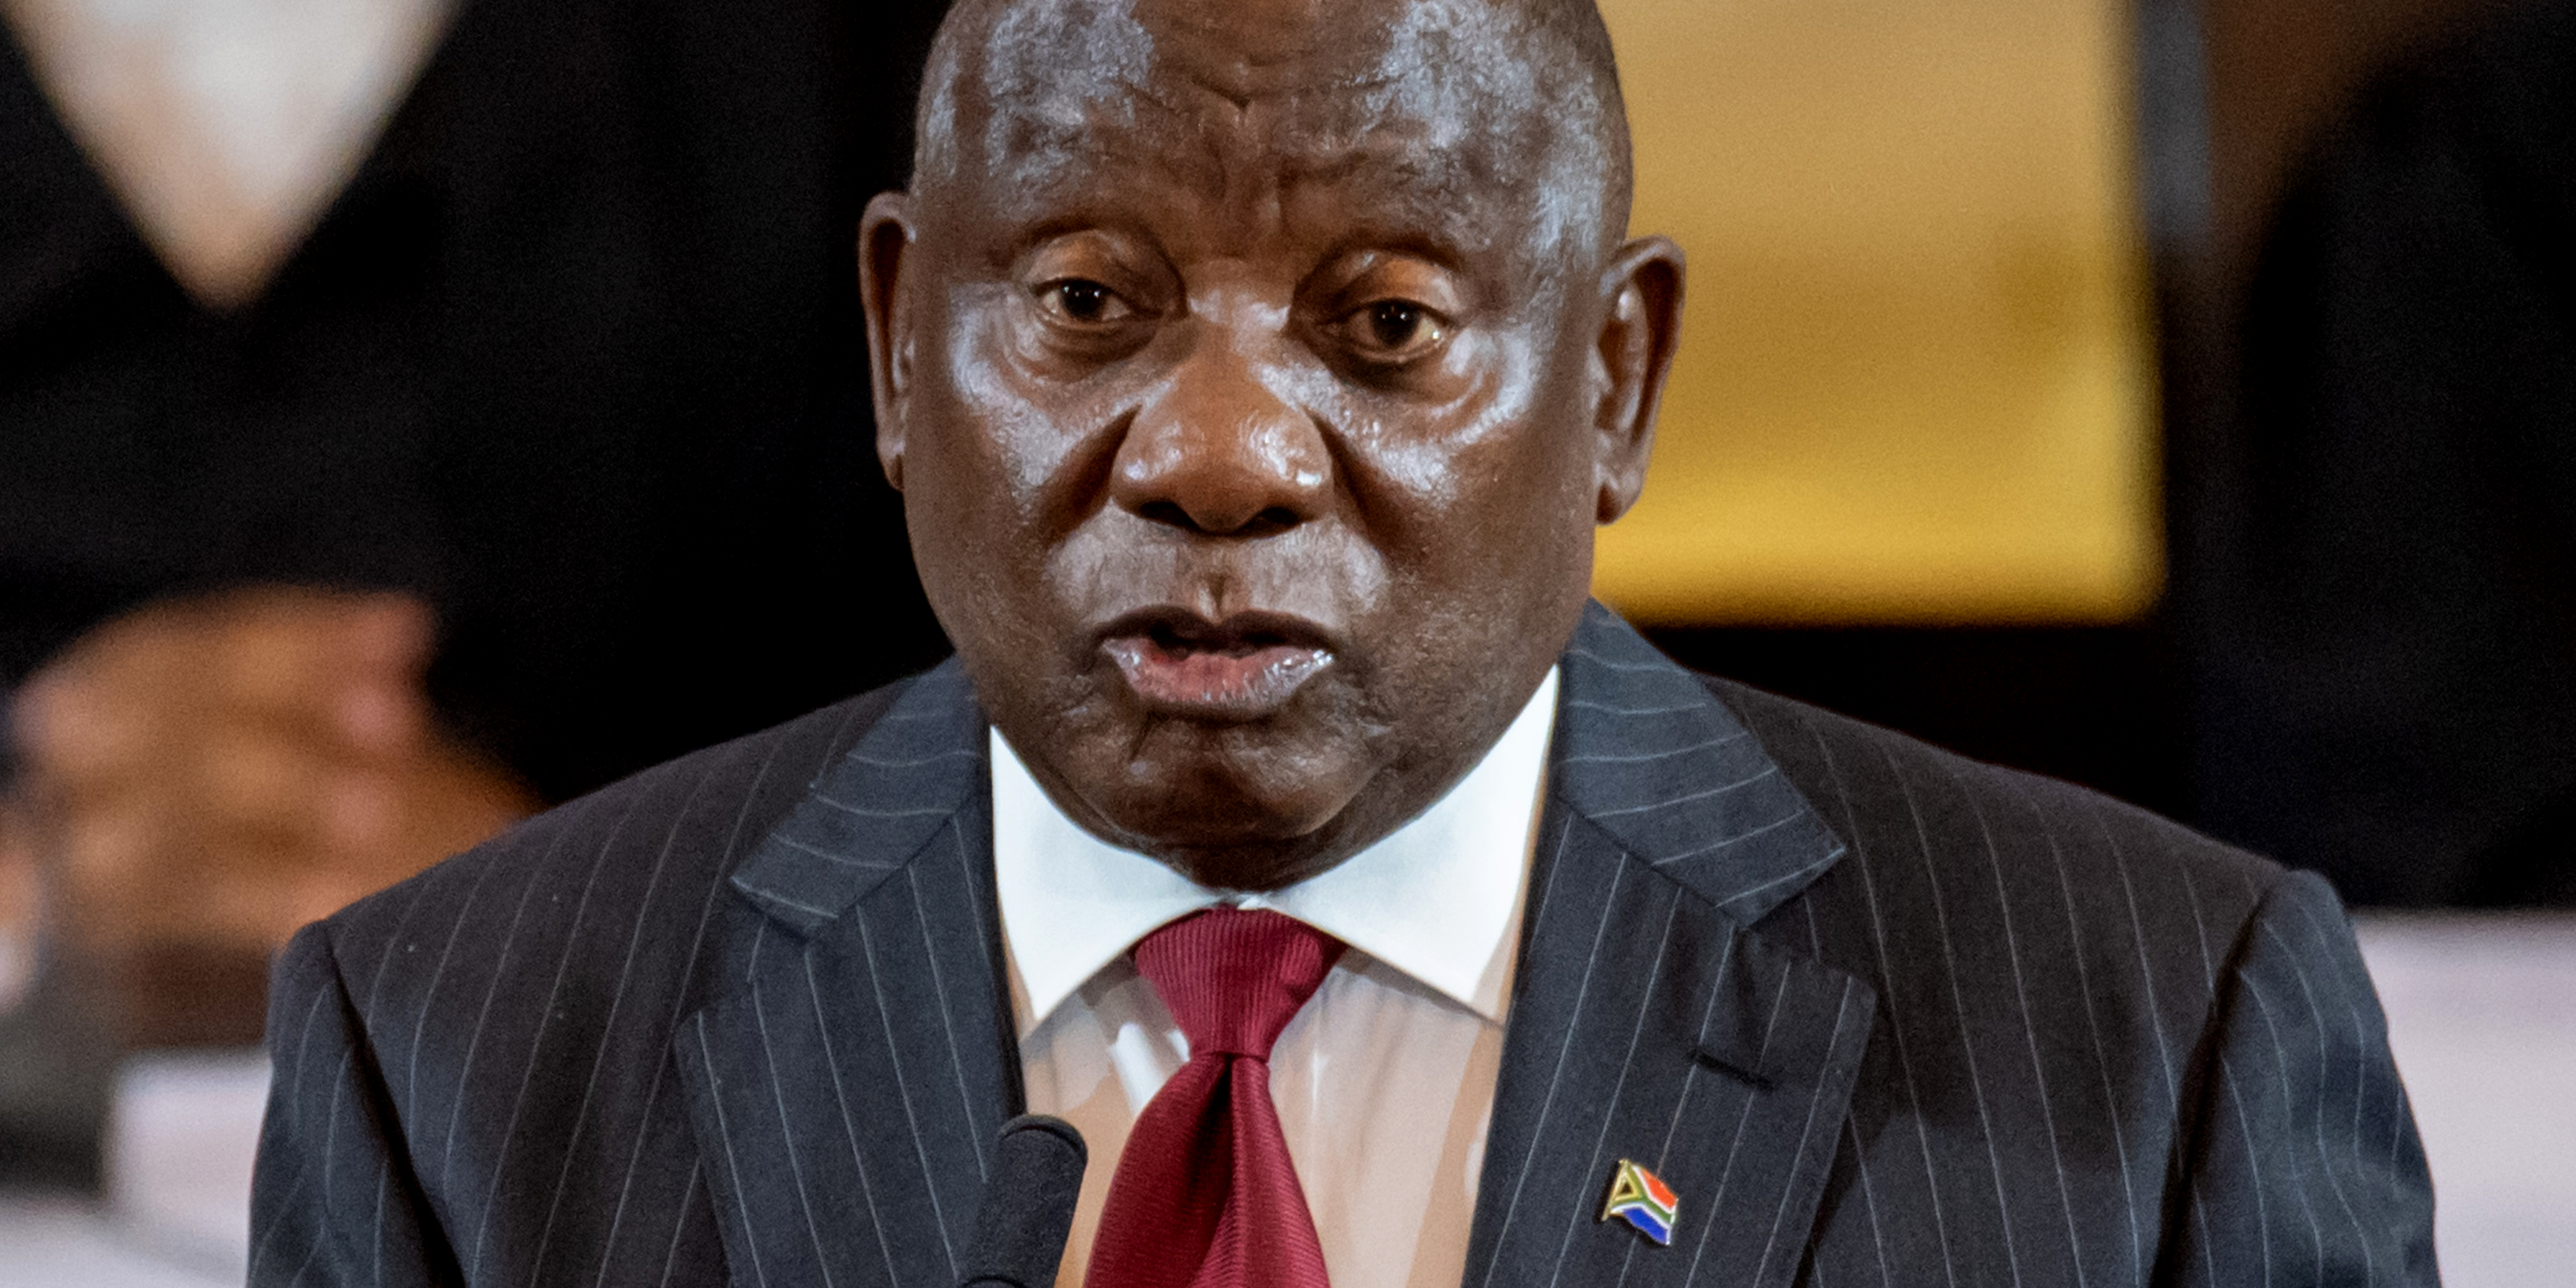 ramaphosa delivers electioneering ‘klap’ for opposition, talks up sa’s progress with tintswalos in the house